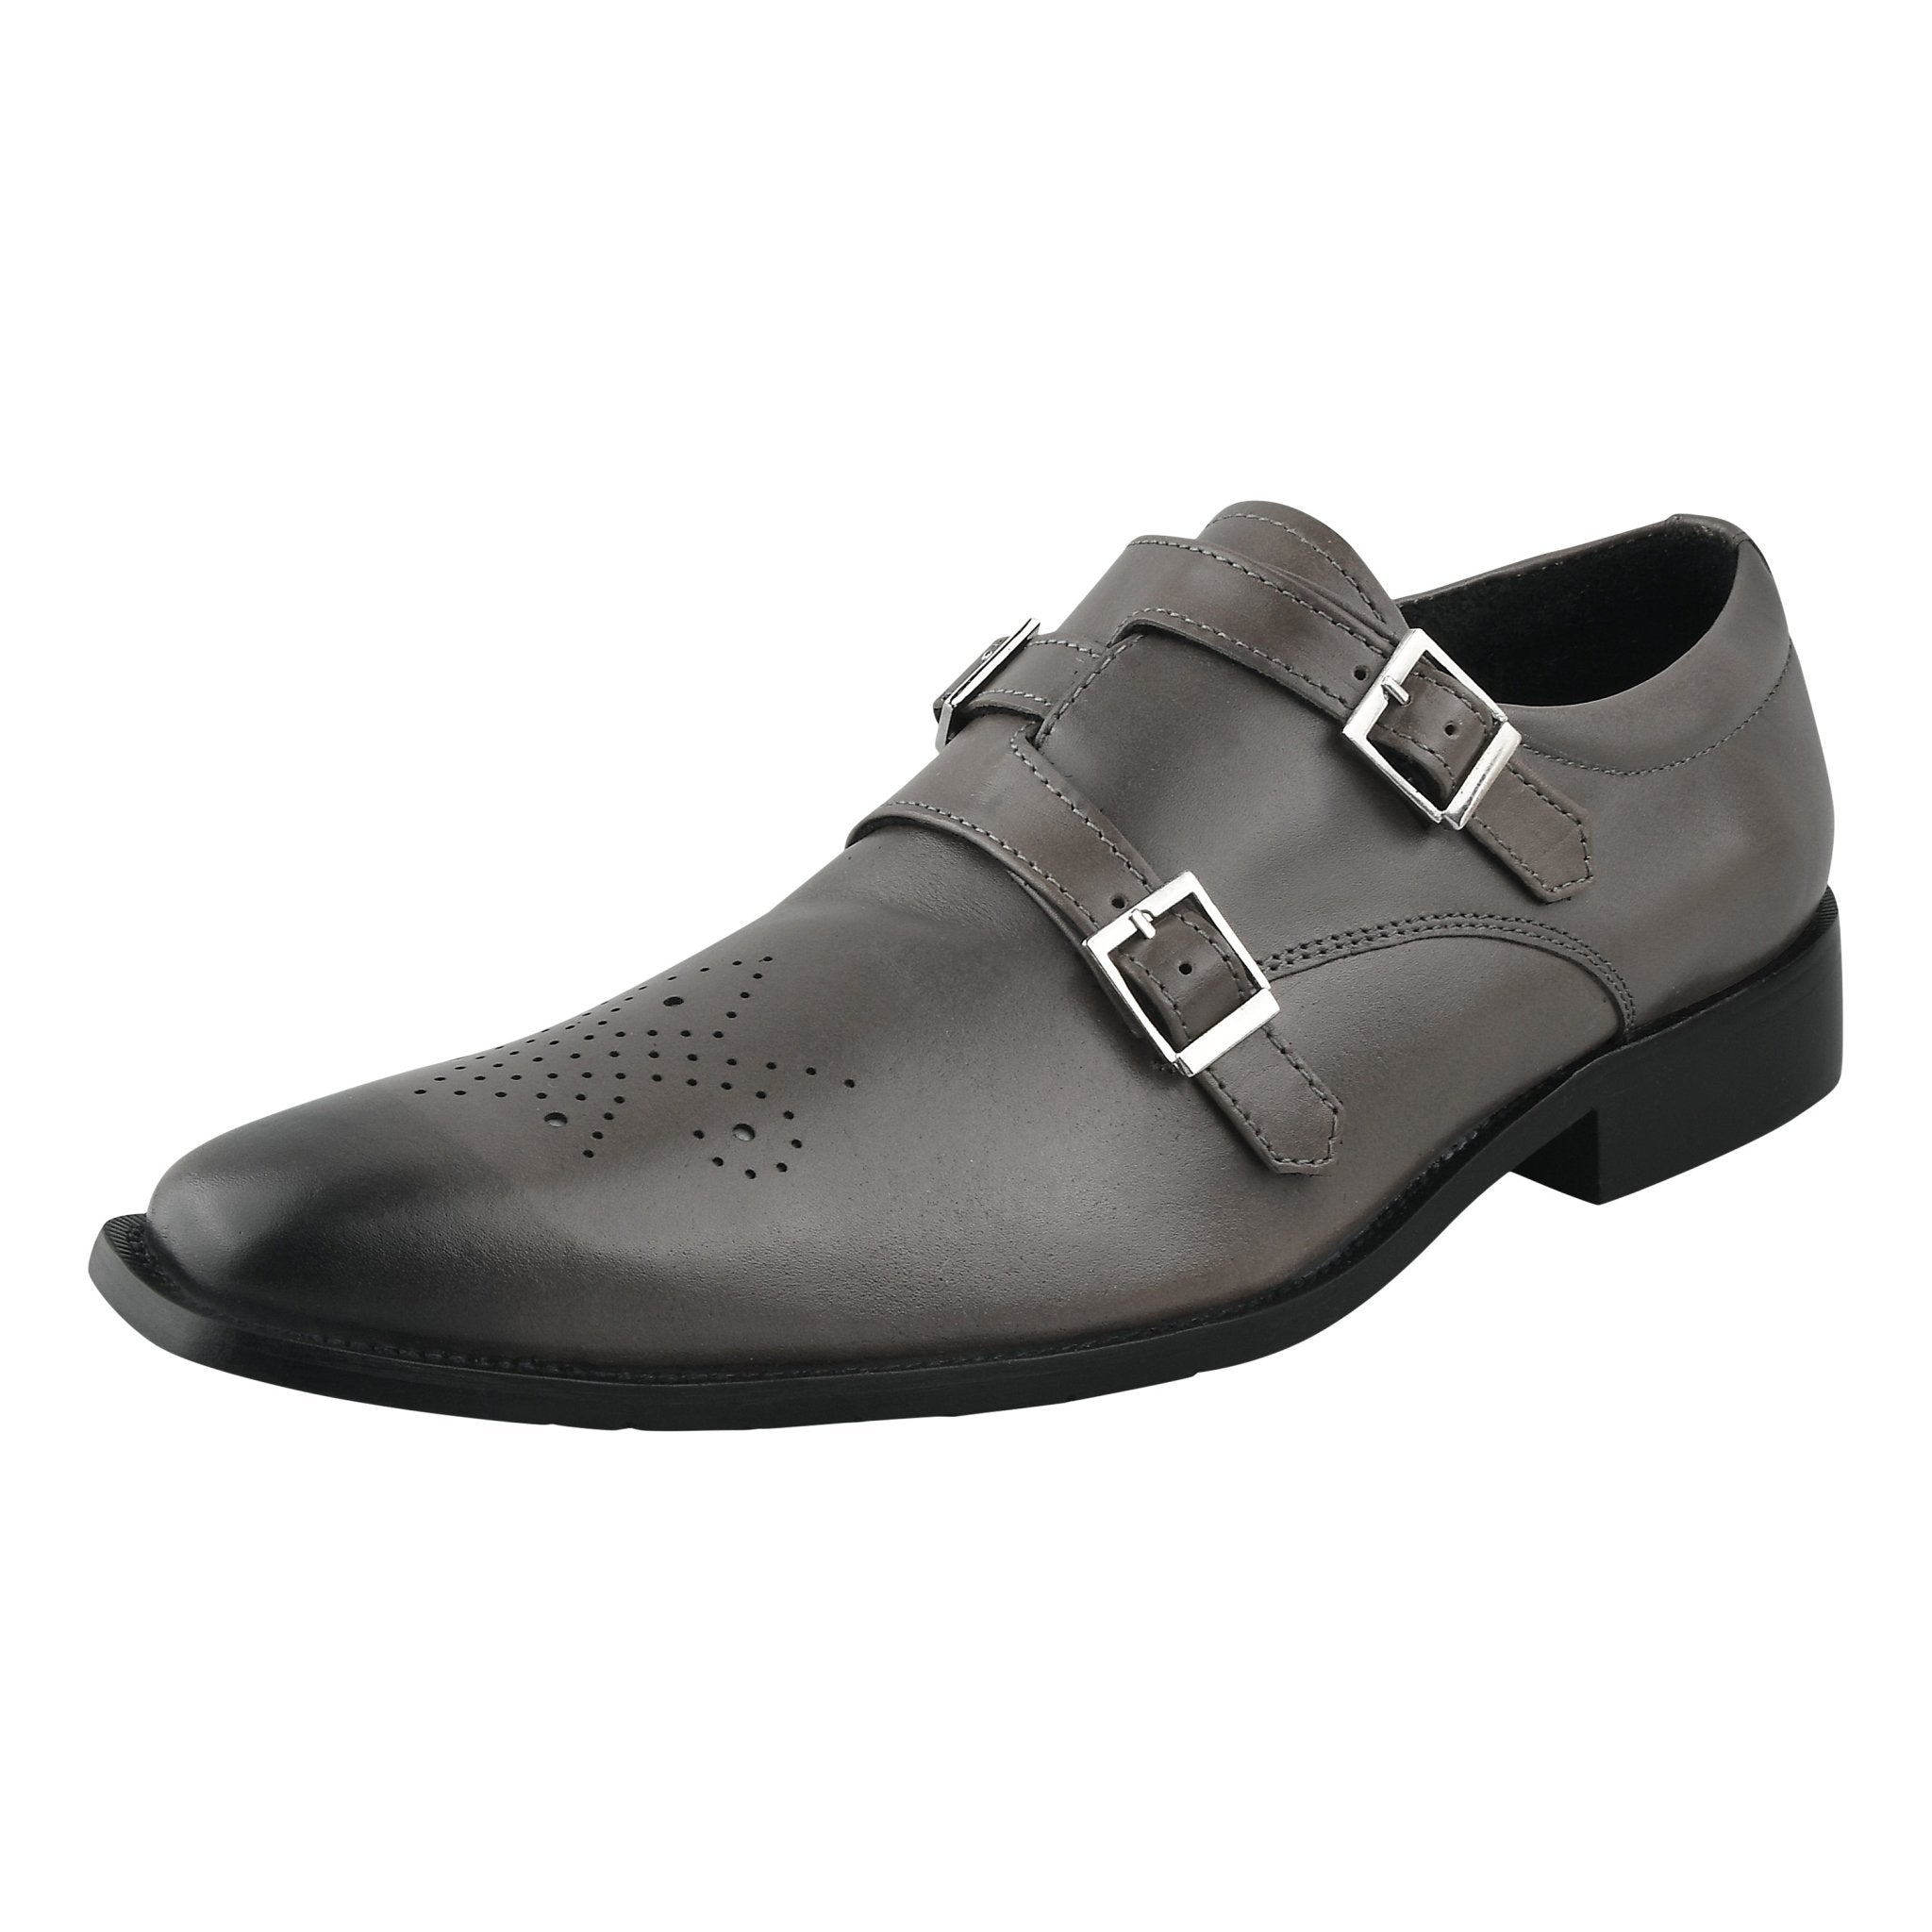 Chatswood Leather Oxford Style Monk Straps